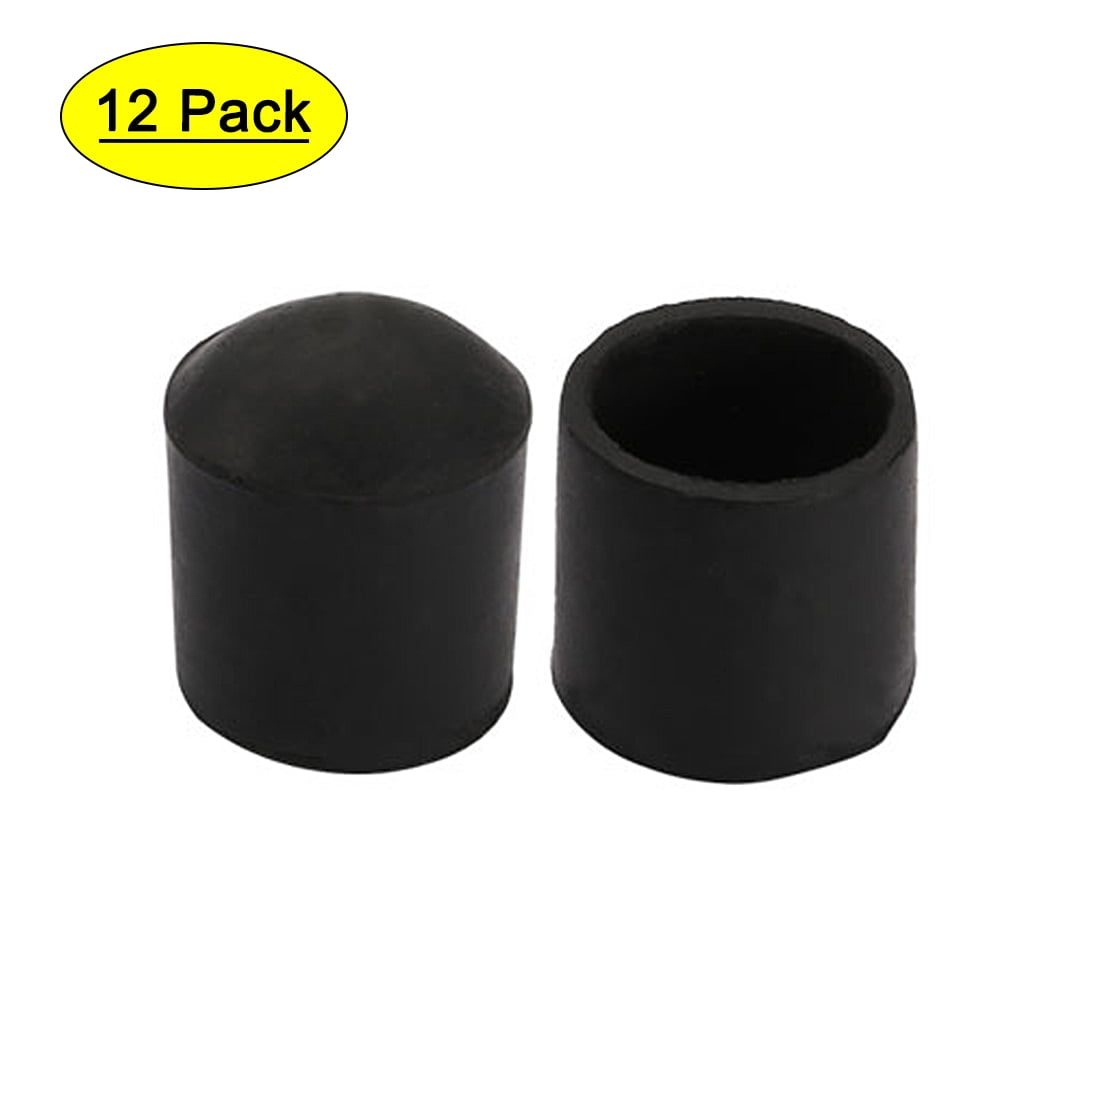 Feet Chair End Tips 35mm Flat Plastic Ferrules For Chairs & Furniture 22mm 